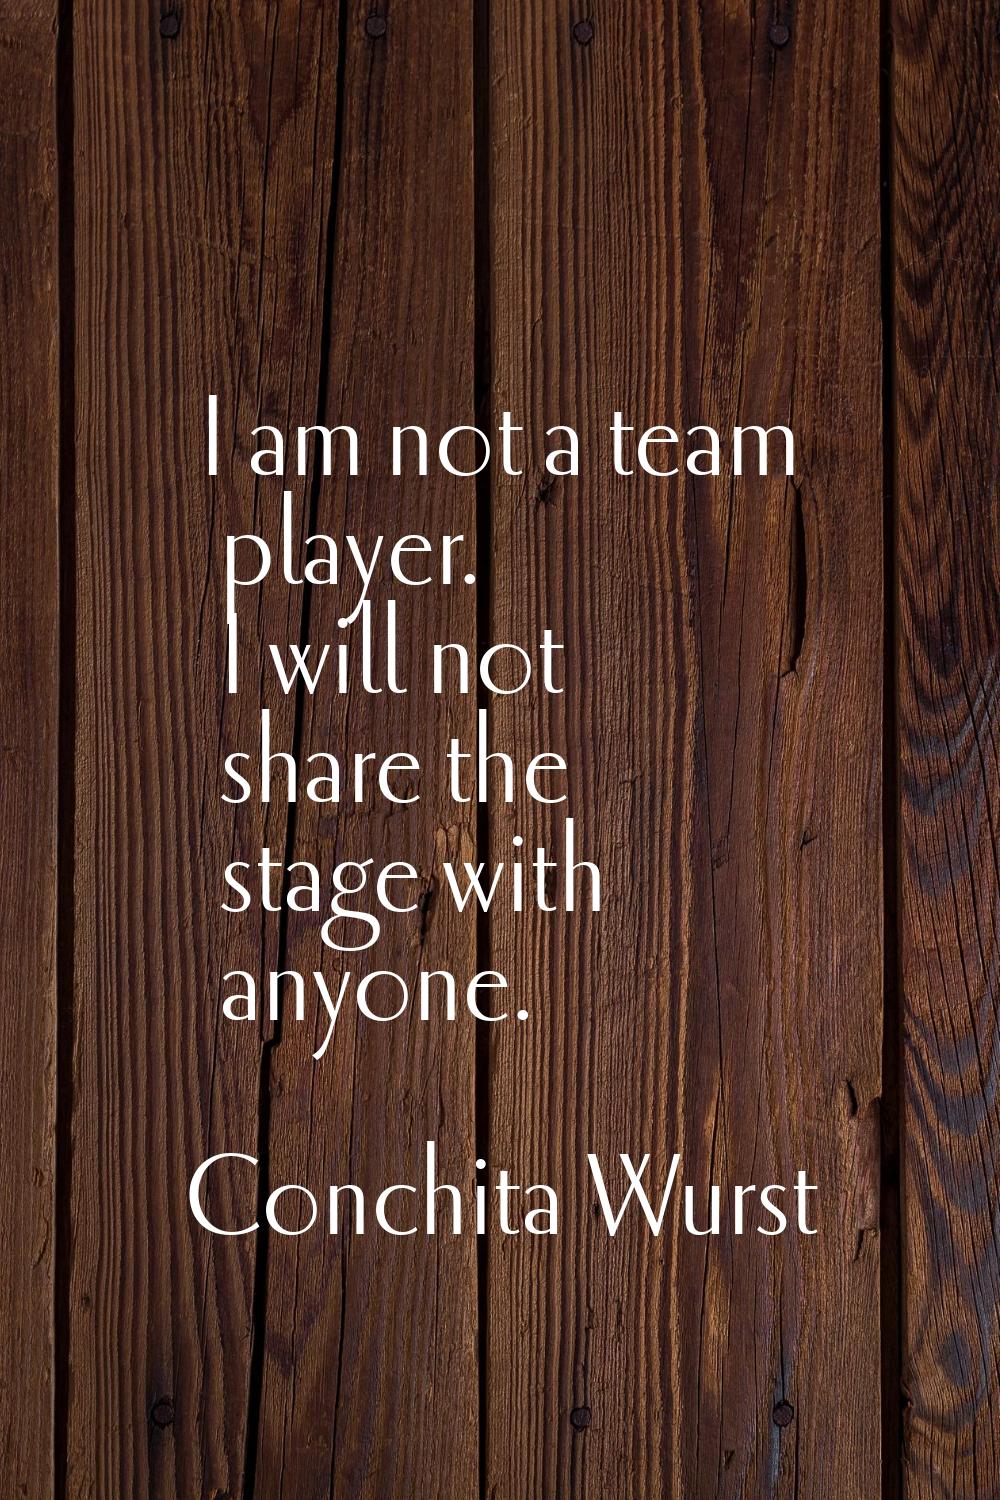 I am not a team player. I will not share the stage with anyone.